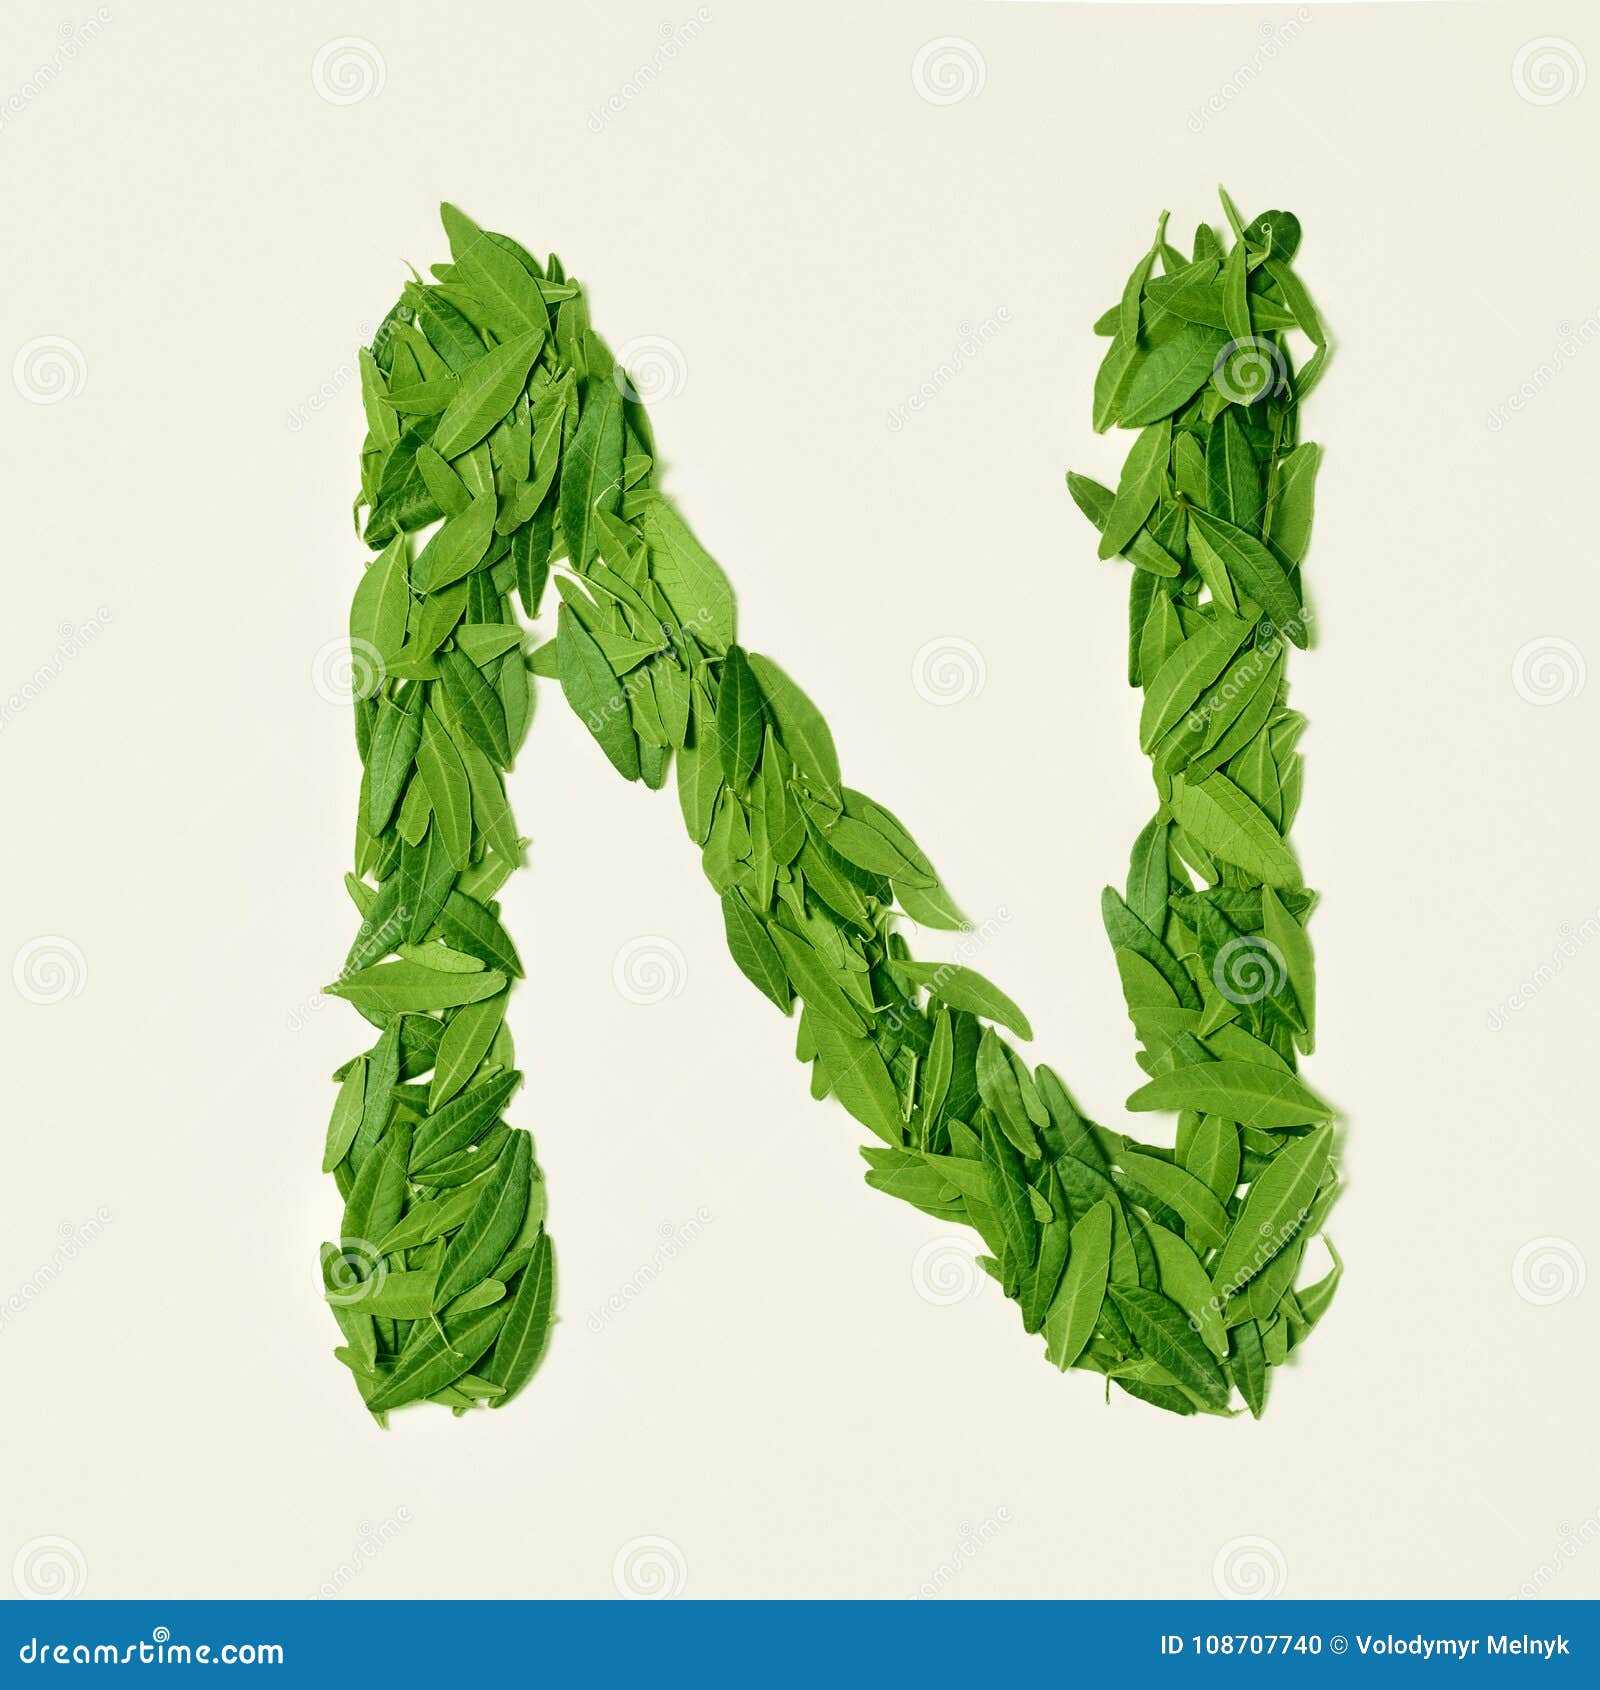 the green dry tea leaf, letter n on white background, top view